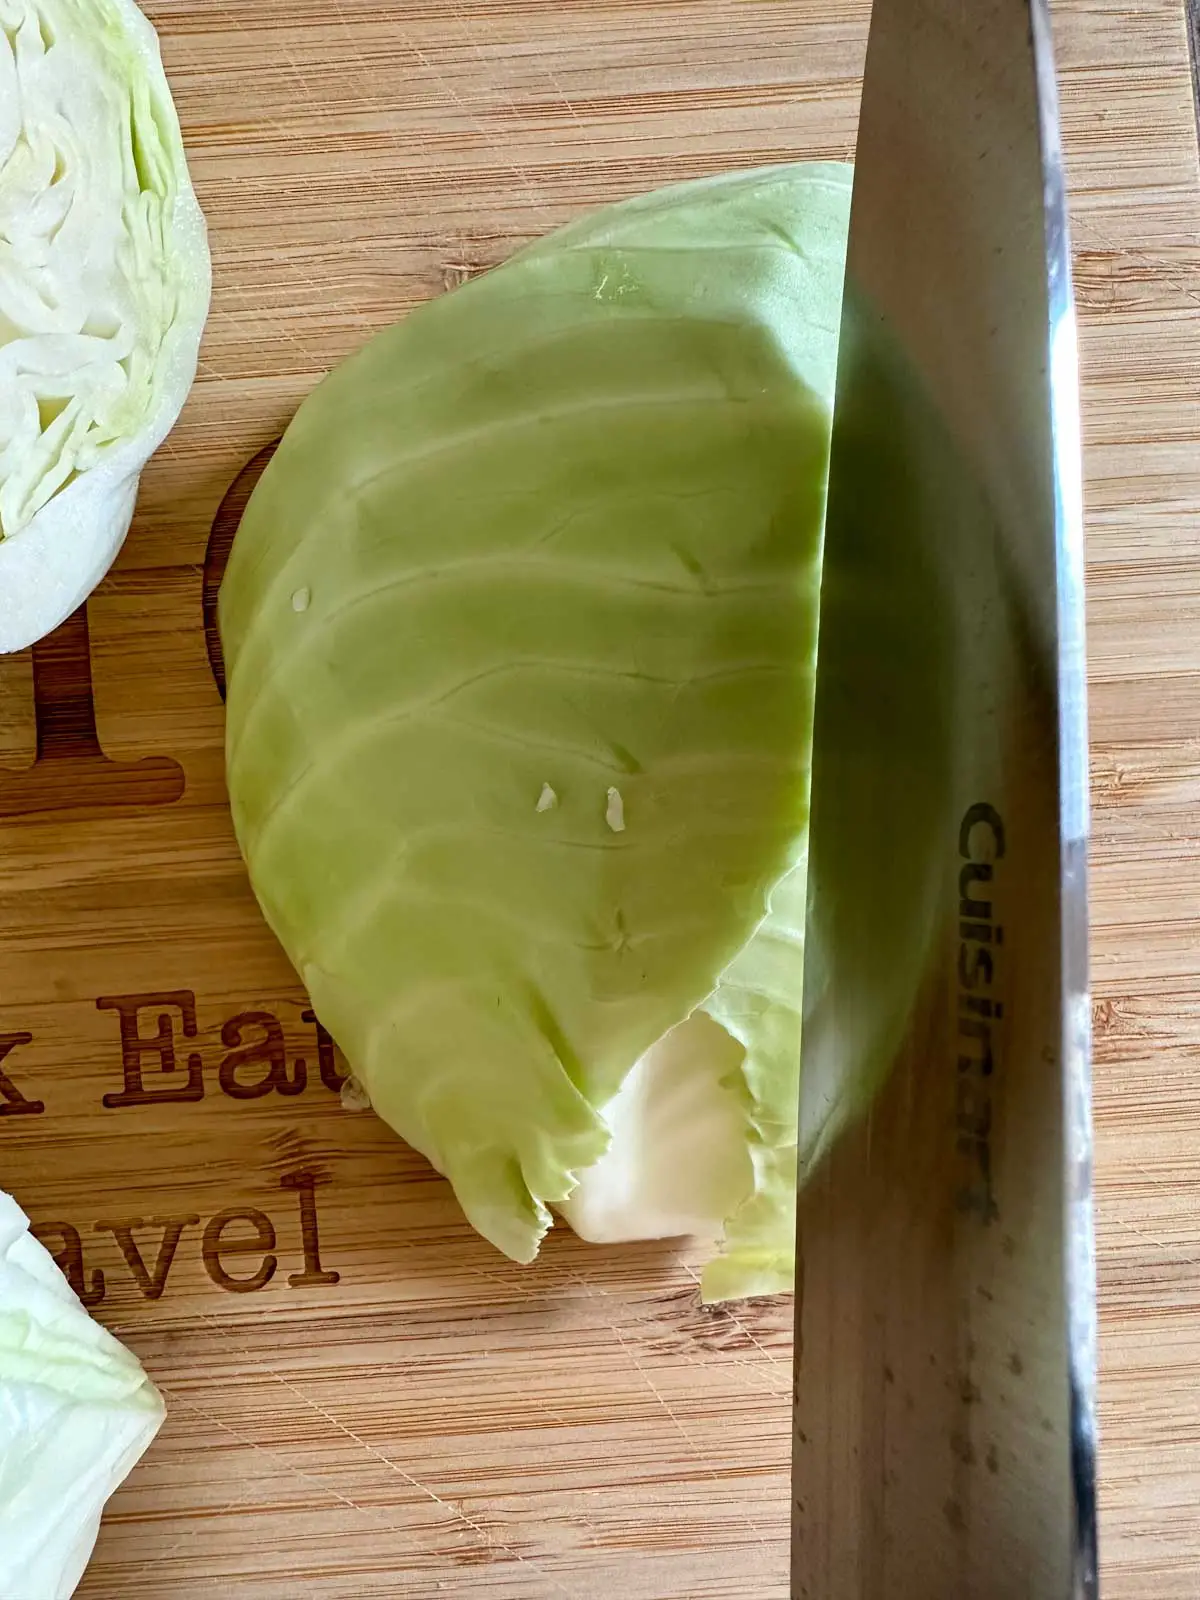 Green cabbage split into green and white parts on a wooden cutting board. This is a knife poised over one of the parts of the cabbage.